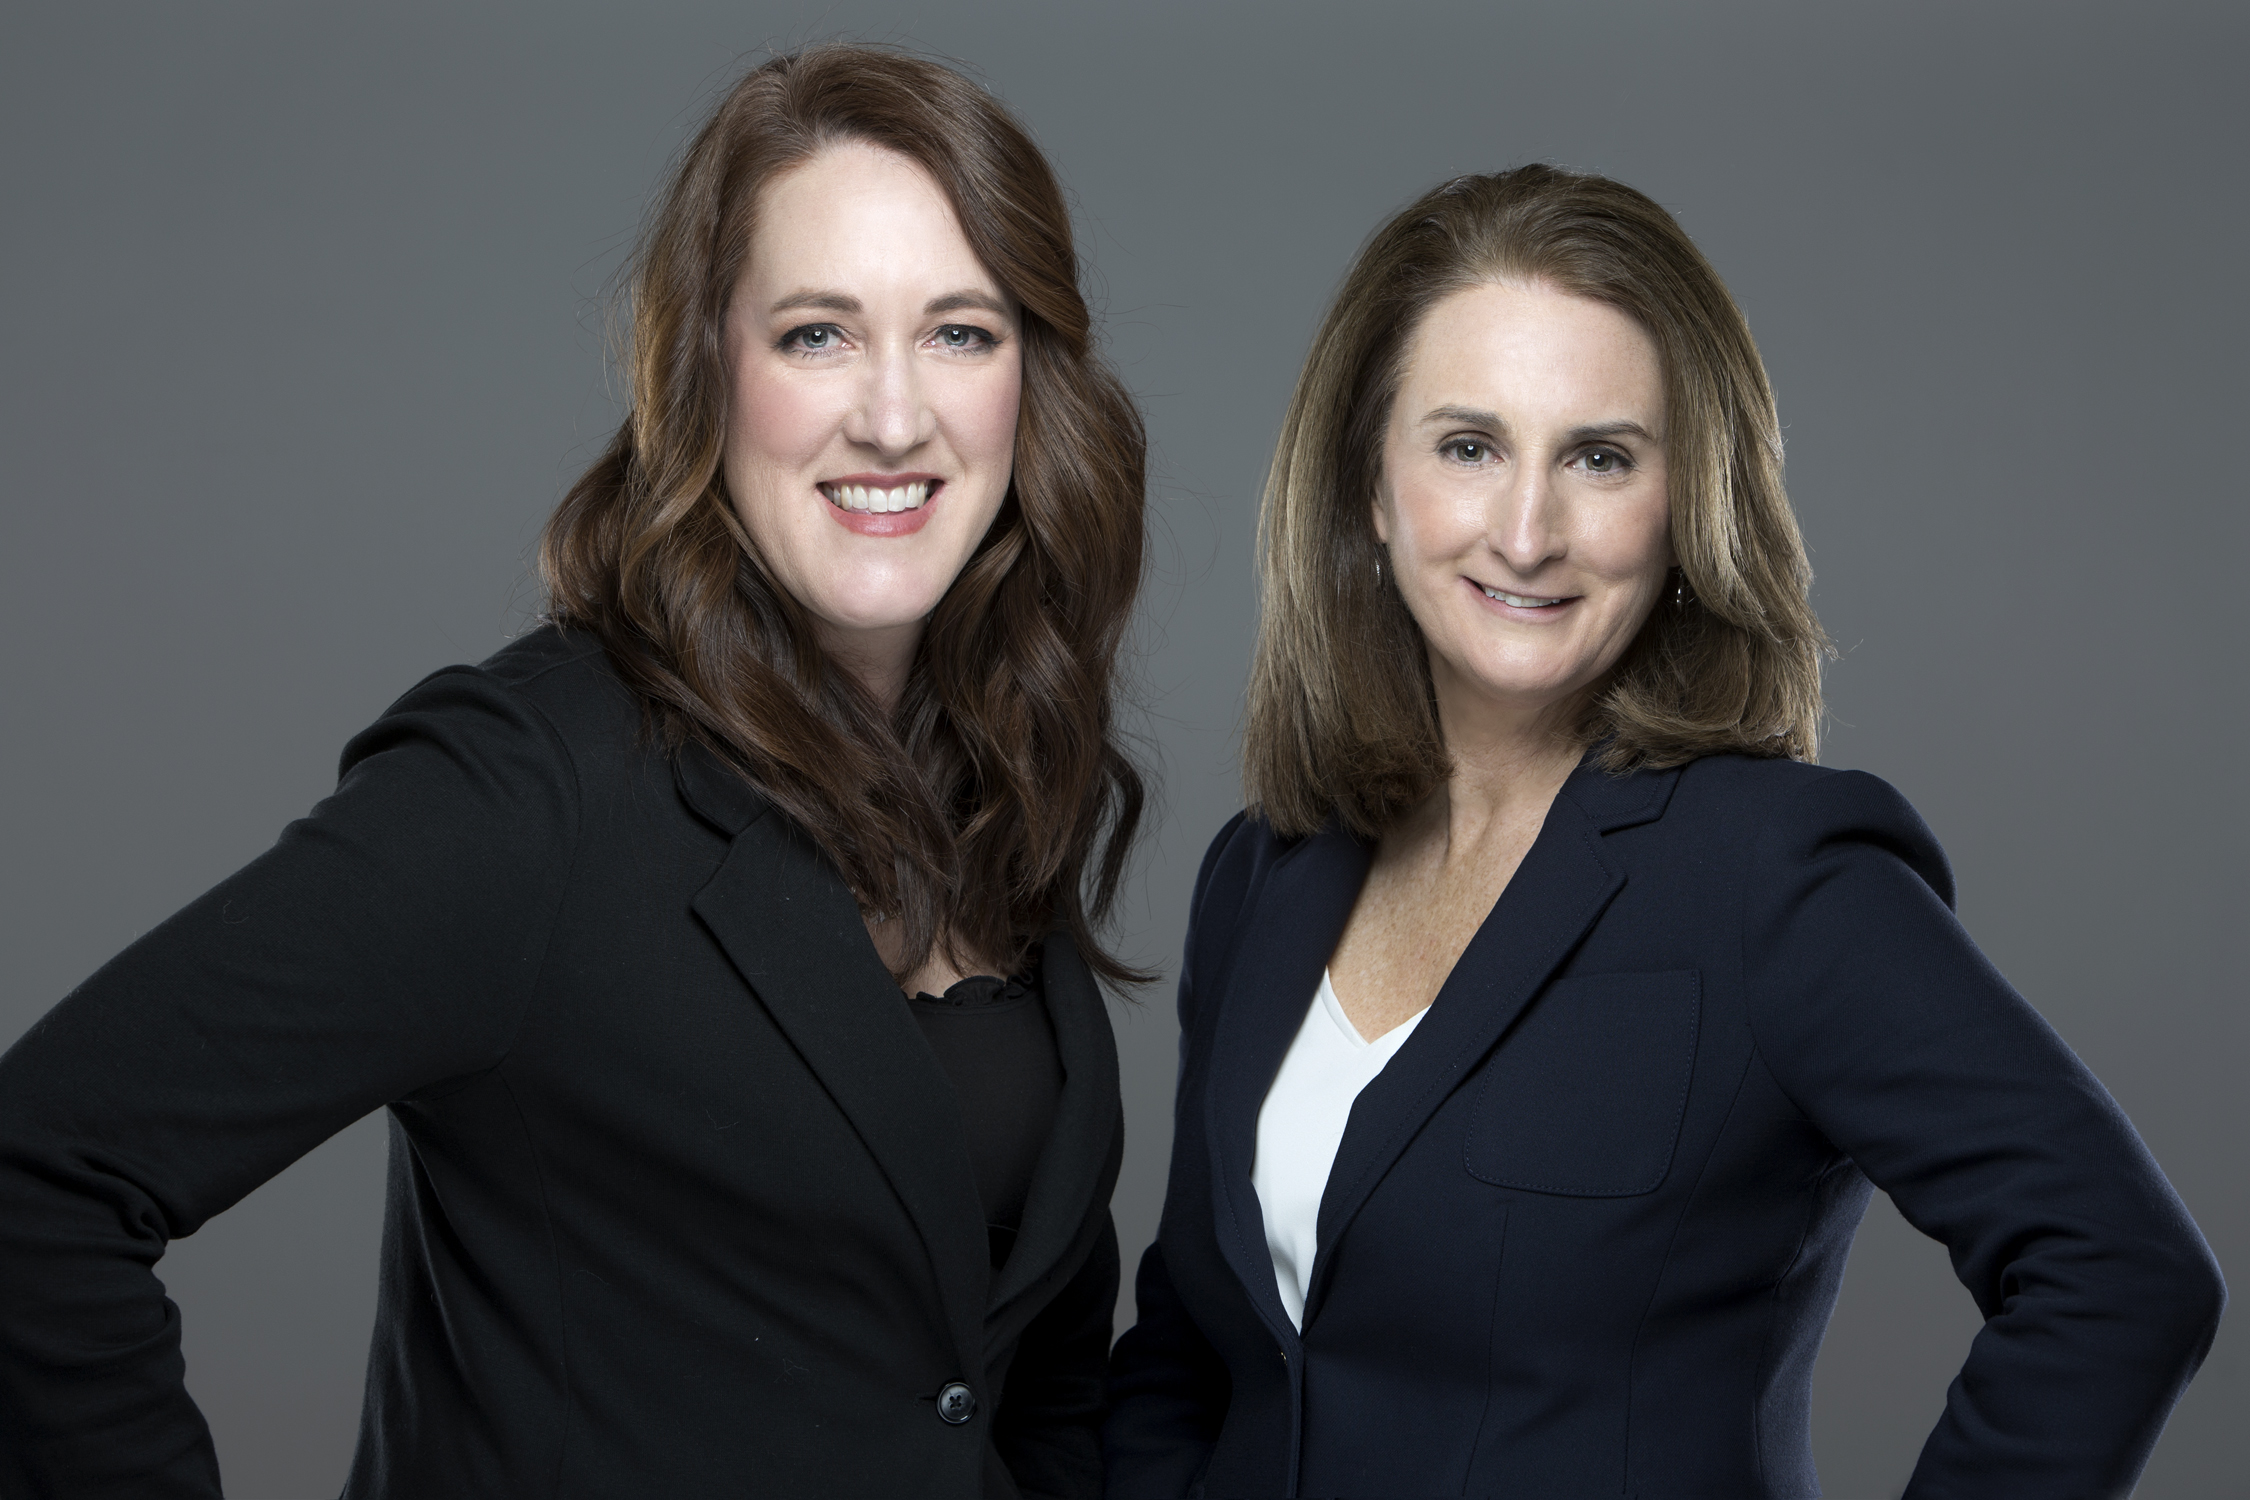 Tracey Goodwin and Holly Oberacker profile